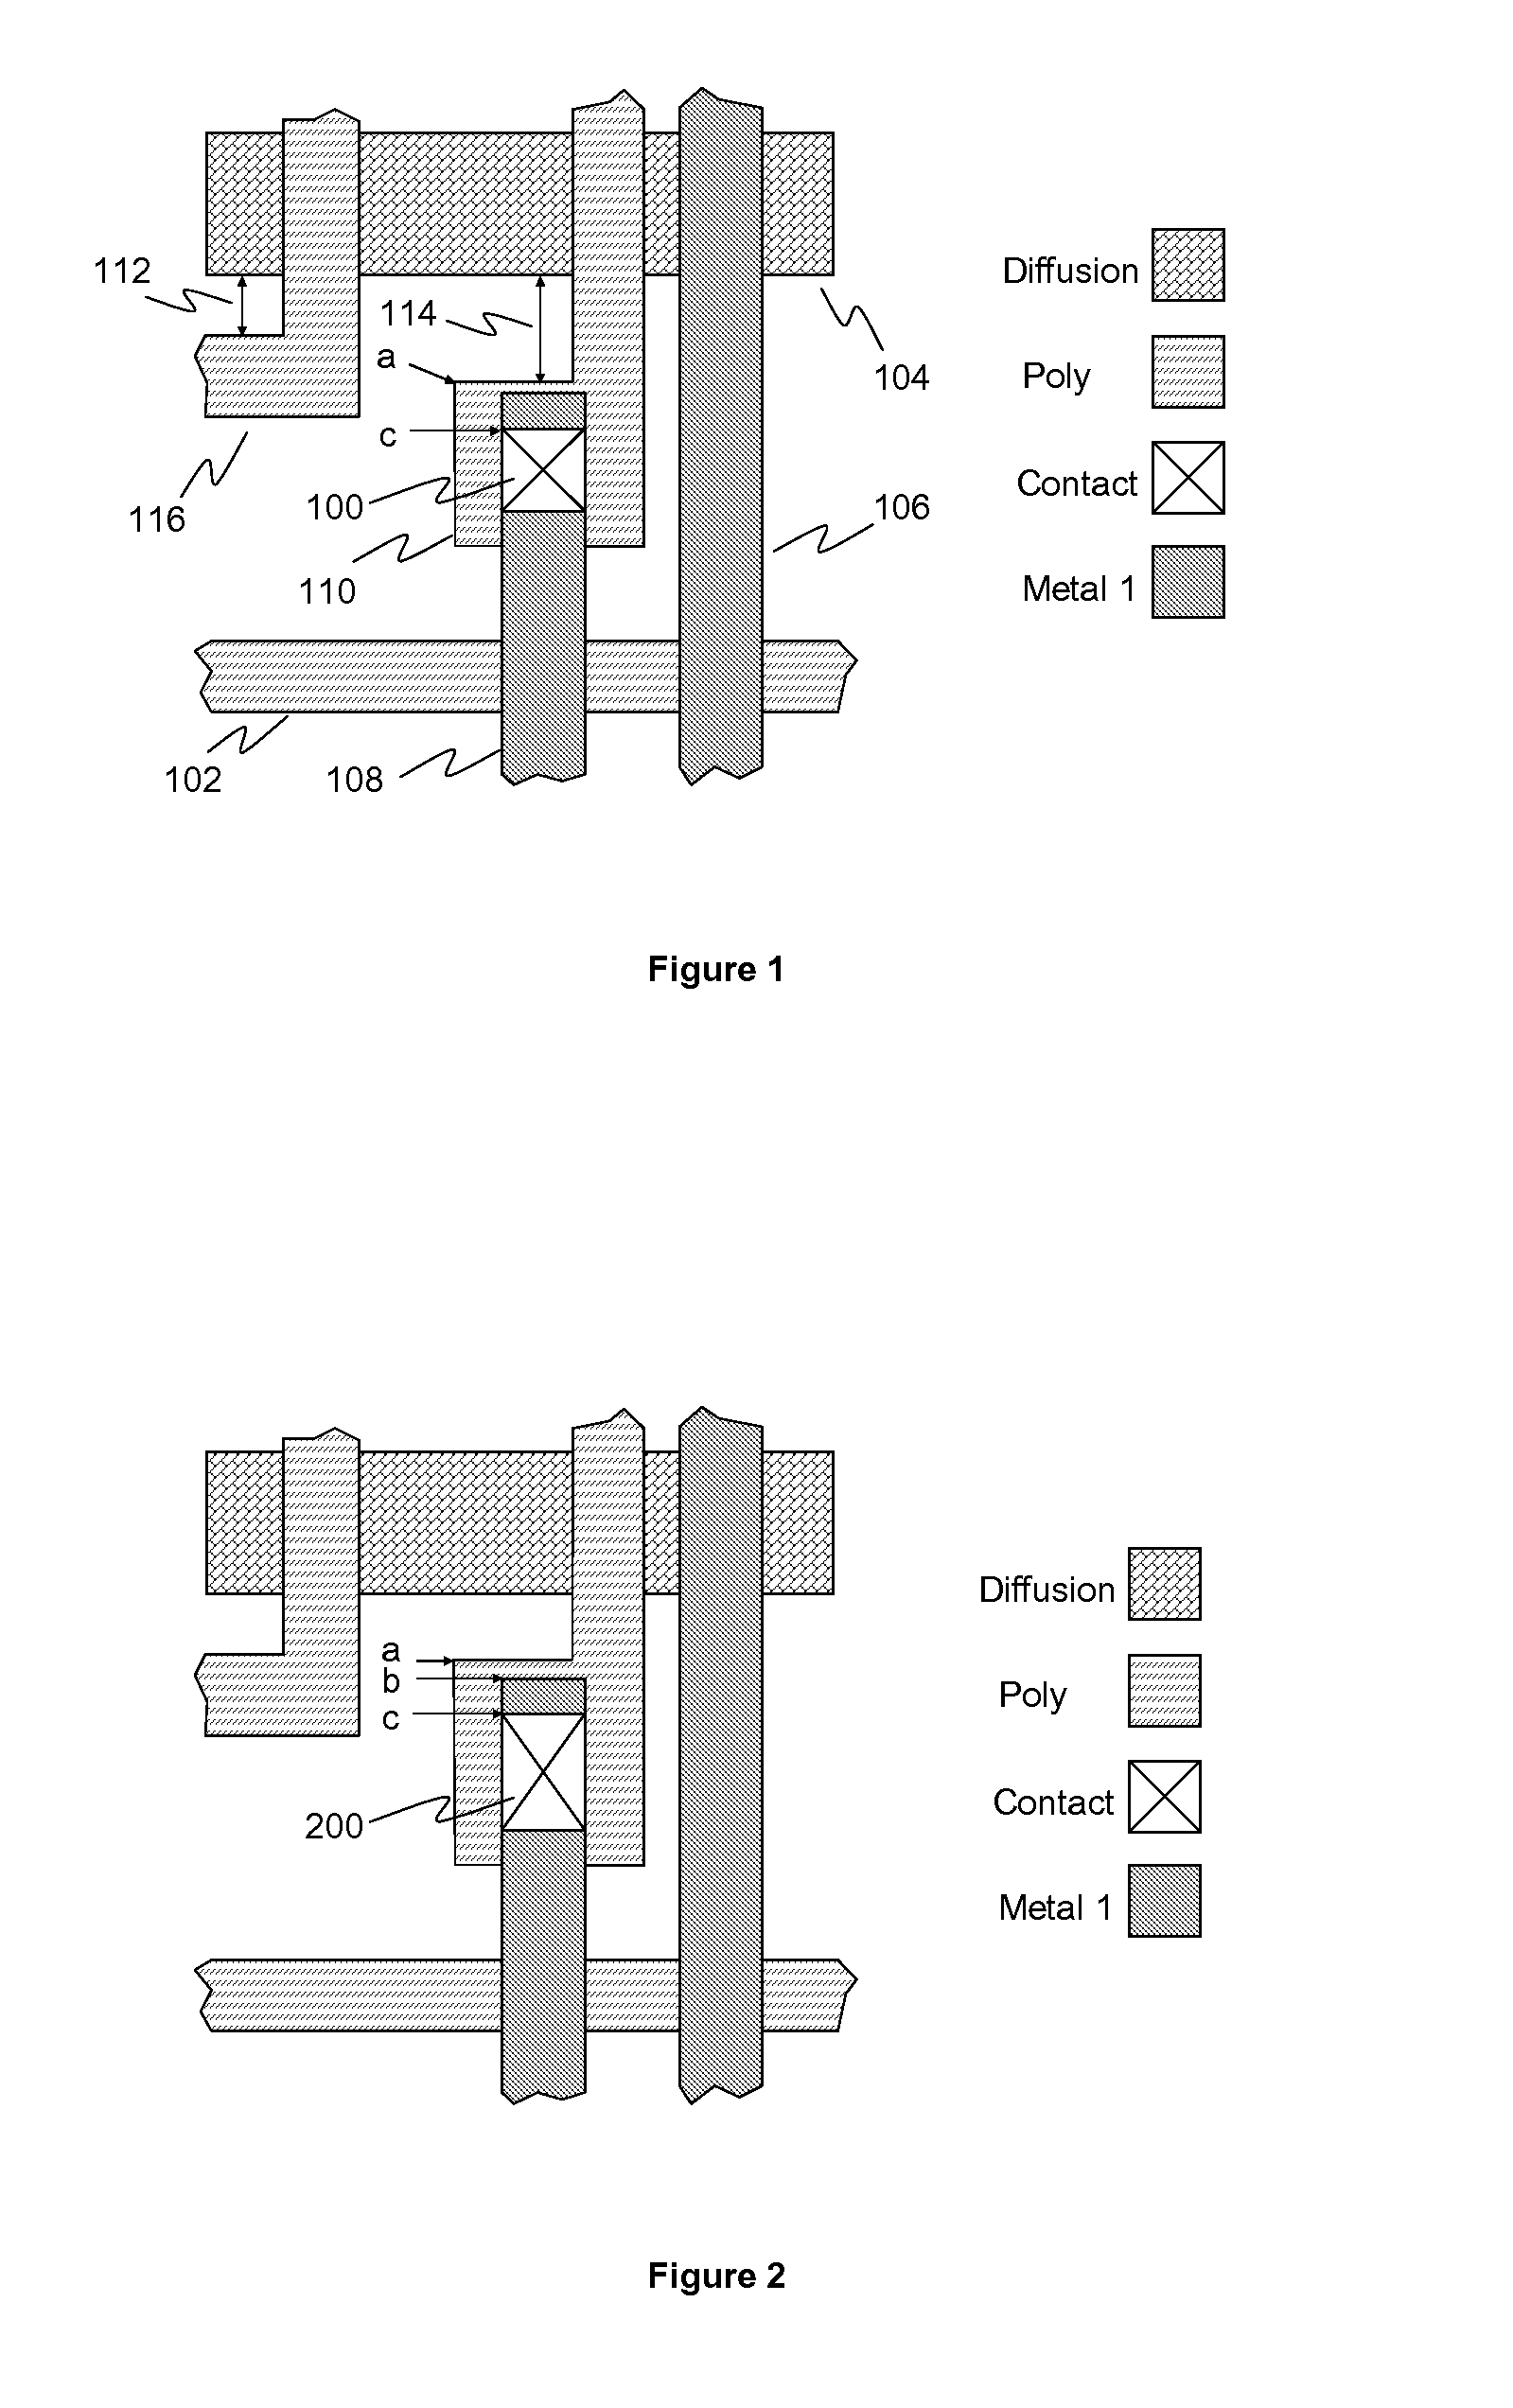 Method for Selectively Enlarging Via and Contact Sizes